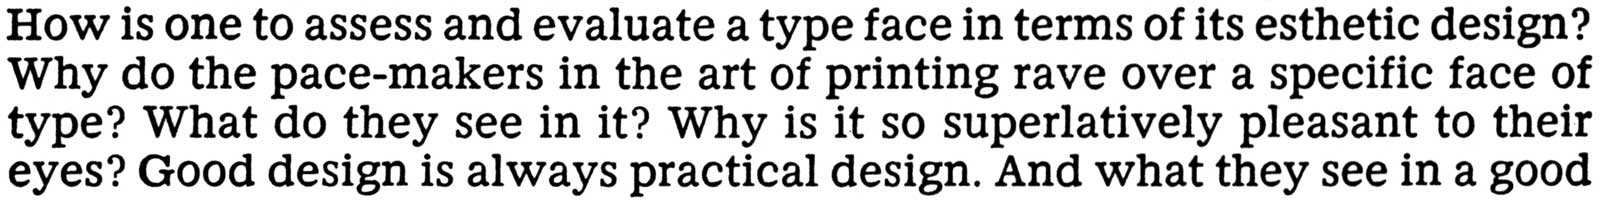 Four-line font sample, with text that begins “How is one to assess and evaluate a type face in terms of its esthetic design? …”